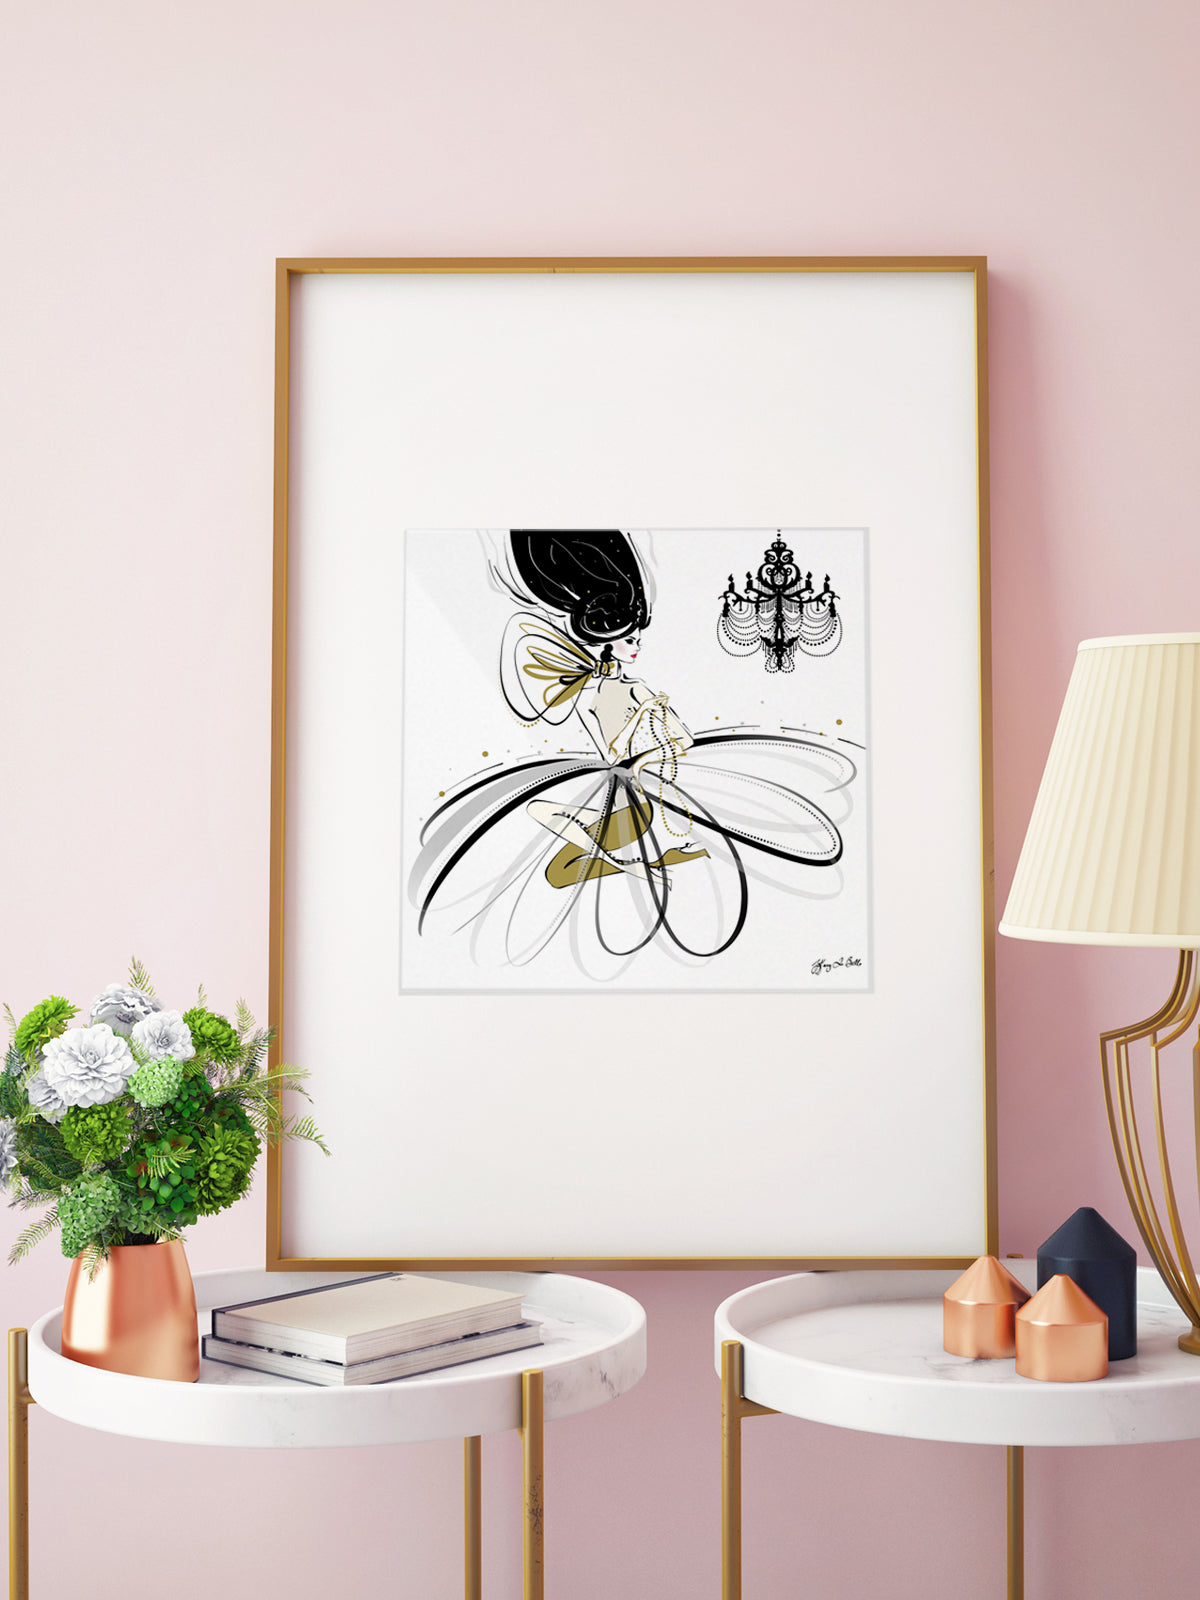 For the Love of Pearls - Illustration - Limited Edition Print - Tiffany La Belle